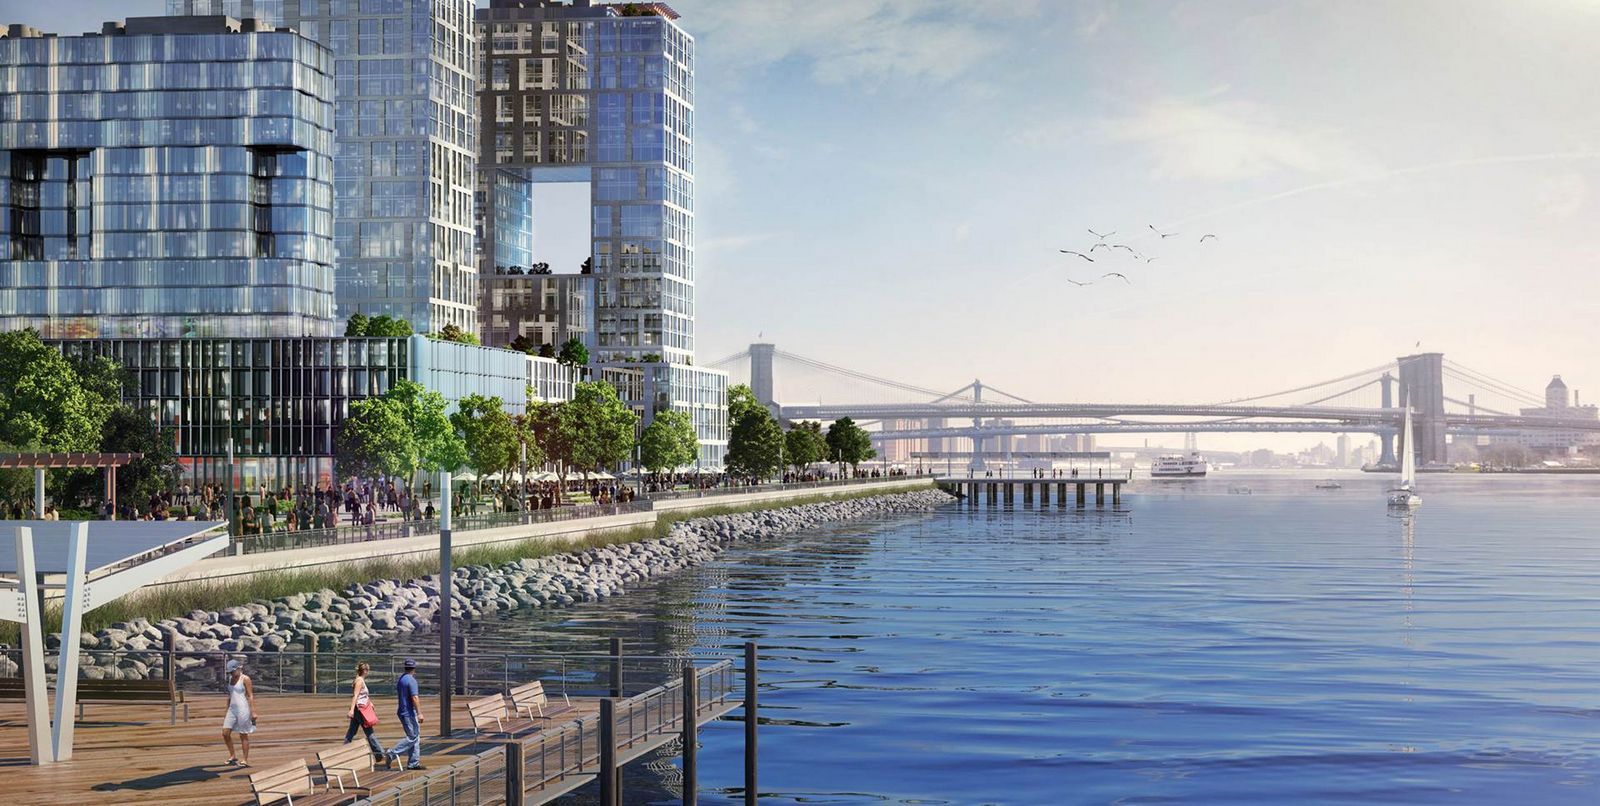 Associated PressThis artist rendering shows a proposed "Seaport City" neighborhood to be built just south of the Brooklyn Bridge that could act as a buffer against flooding in lower Manhattan.